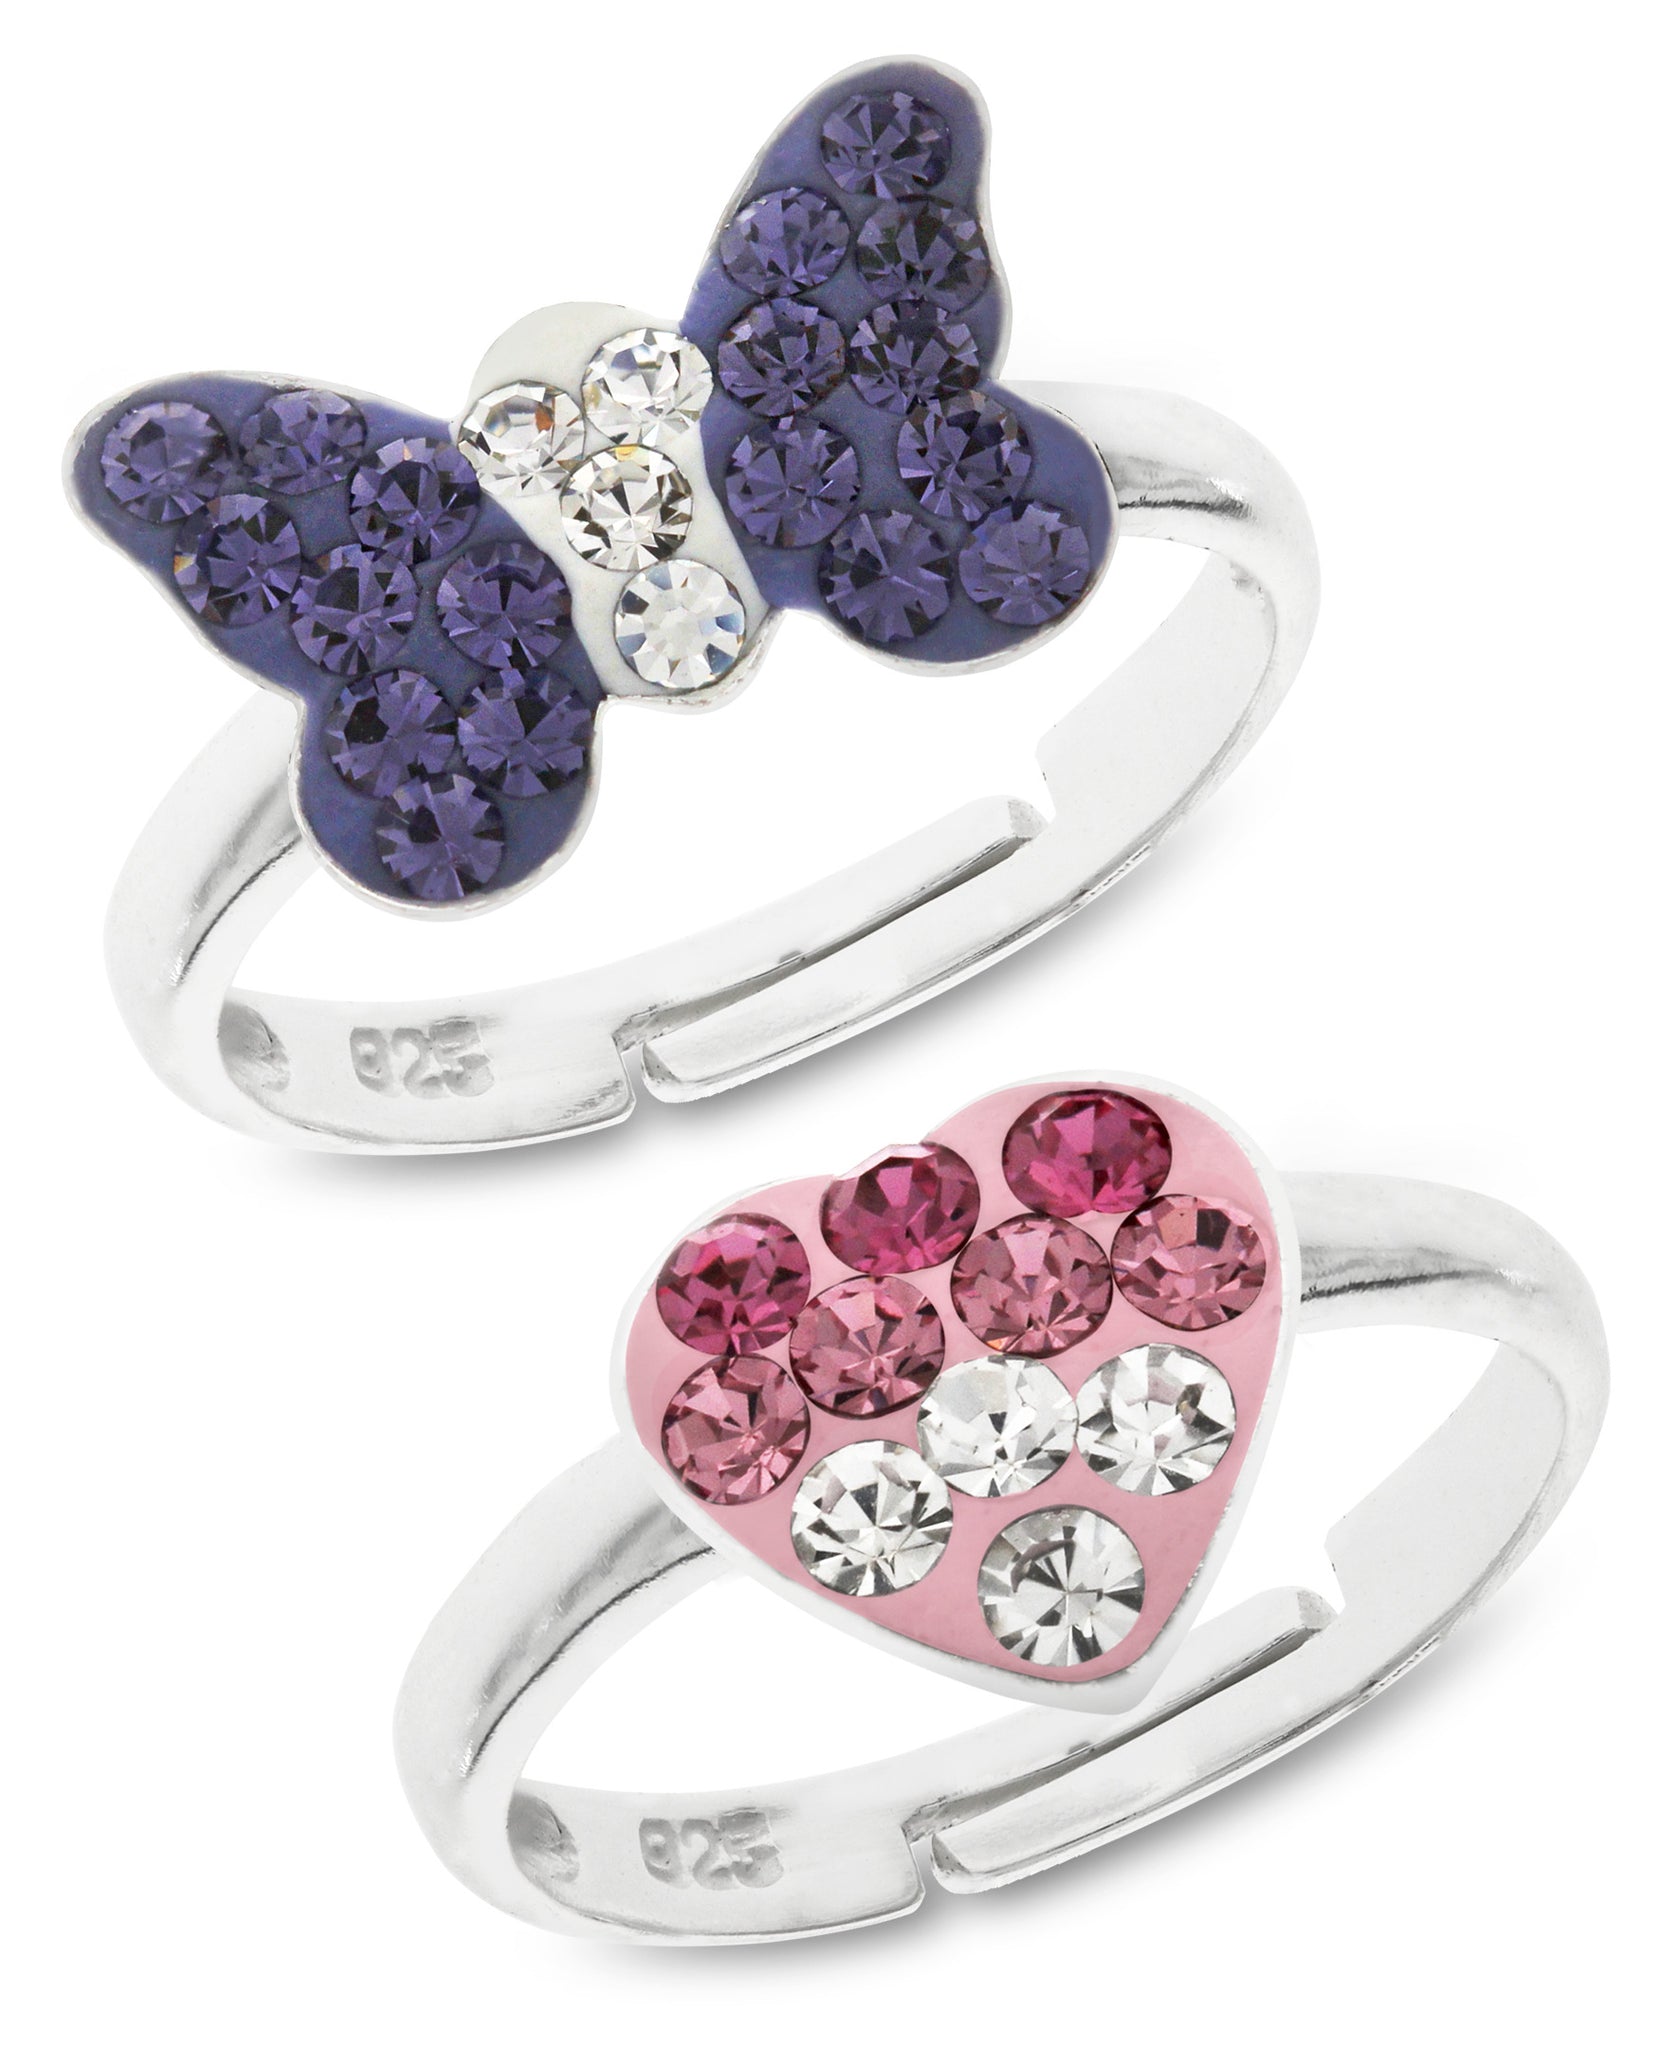 Children's Sterling Silver Crystal Heart & Butterfly Adjustable Rings - Set of 2 - Rhona Sutton Jewellery